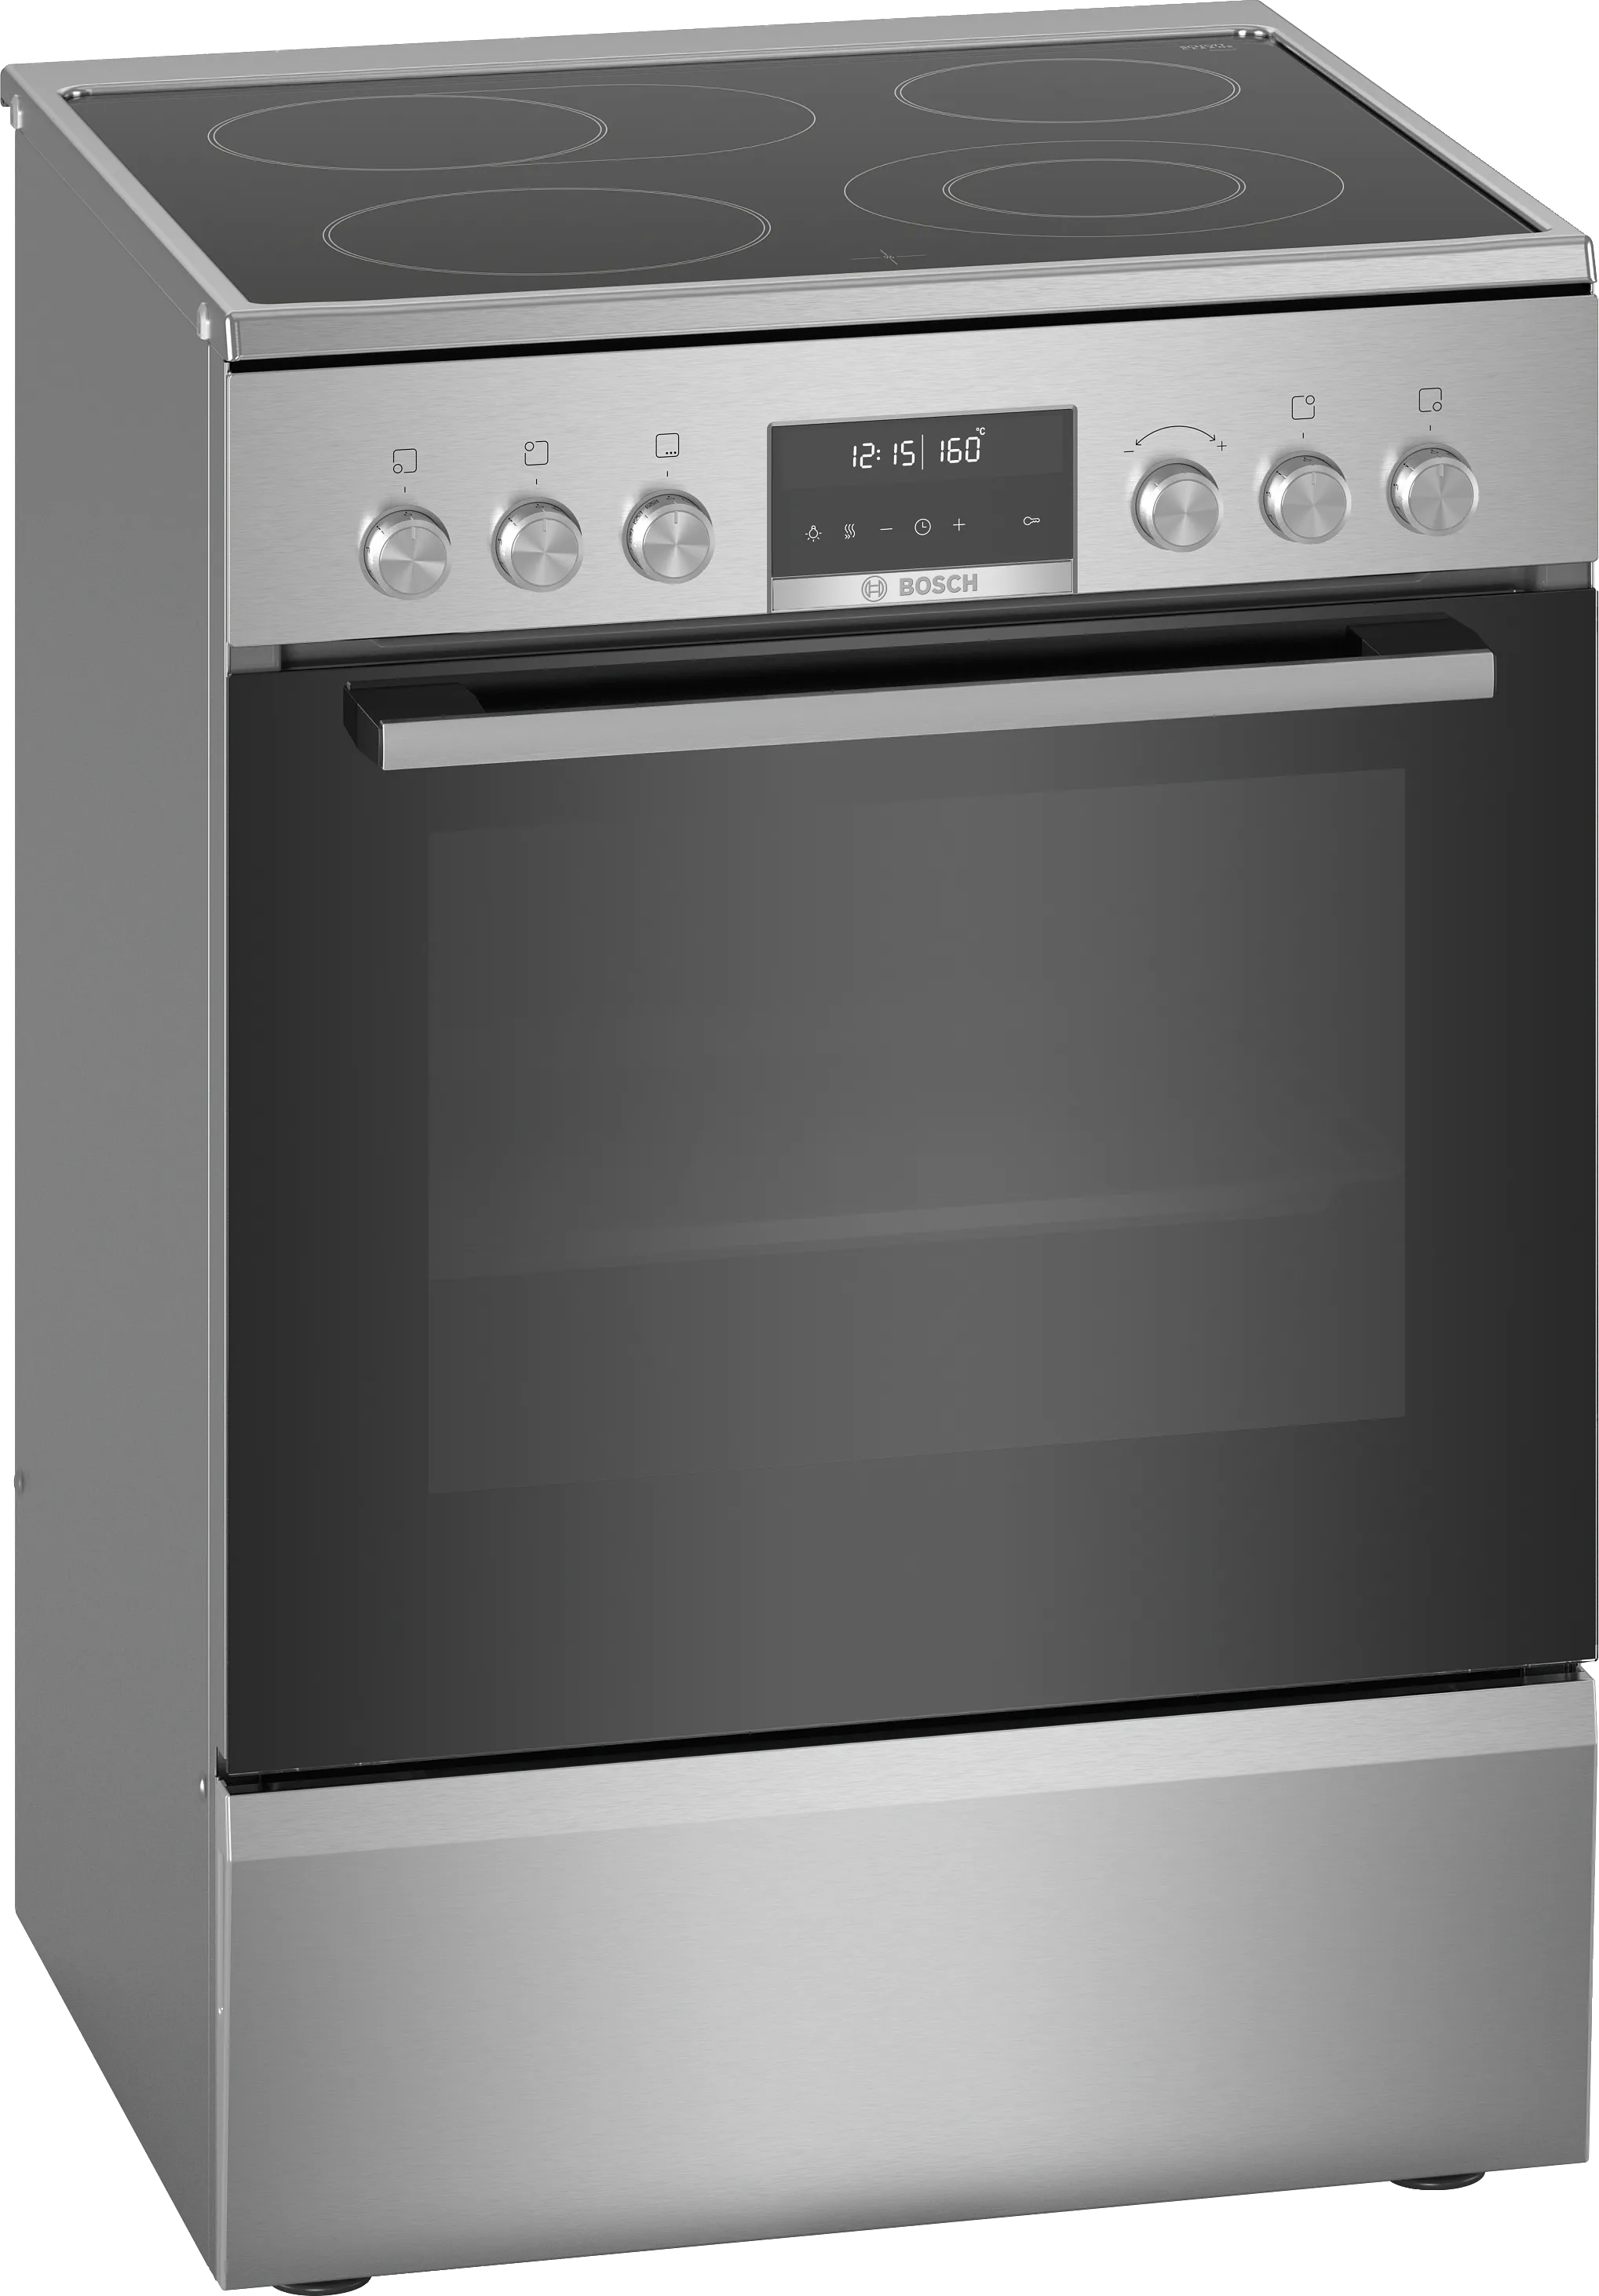 Série 6 free-standing electric cooker Acien inoxydable 